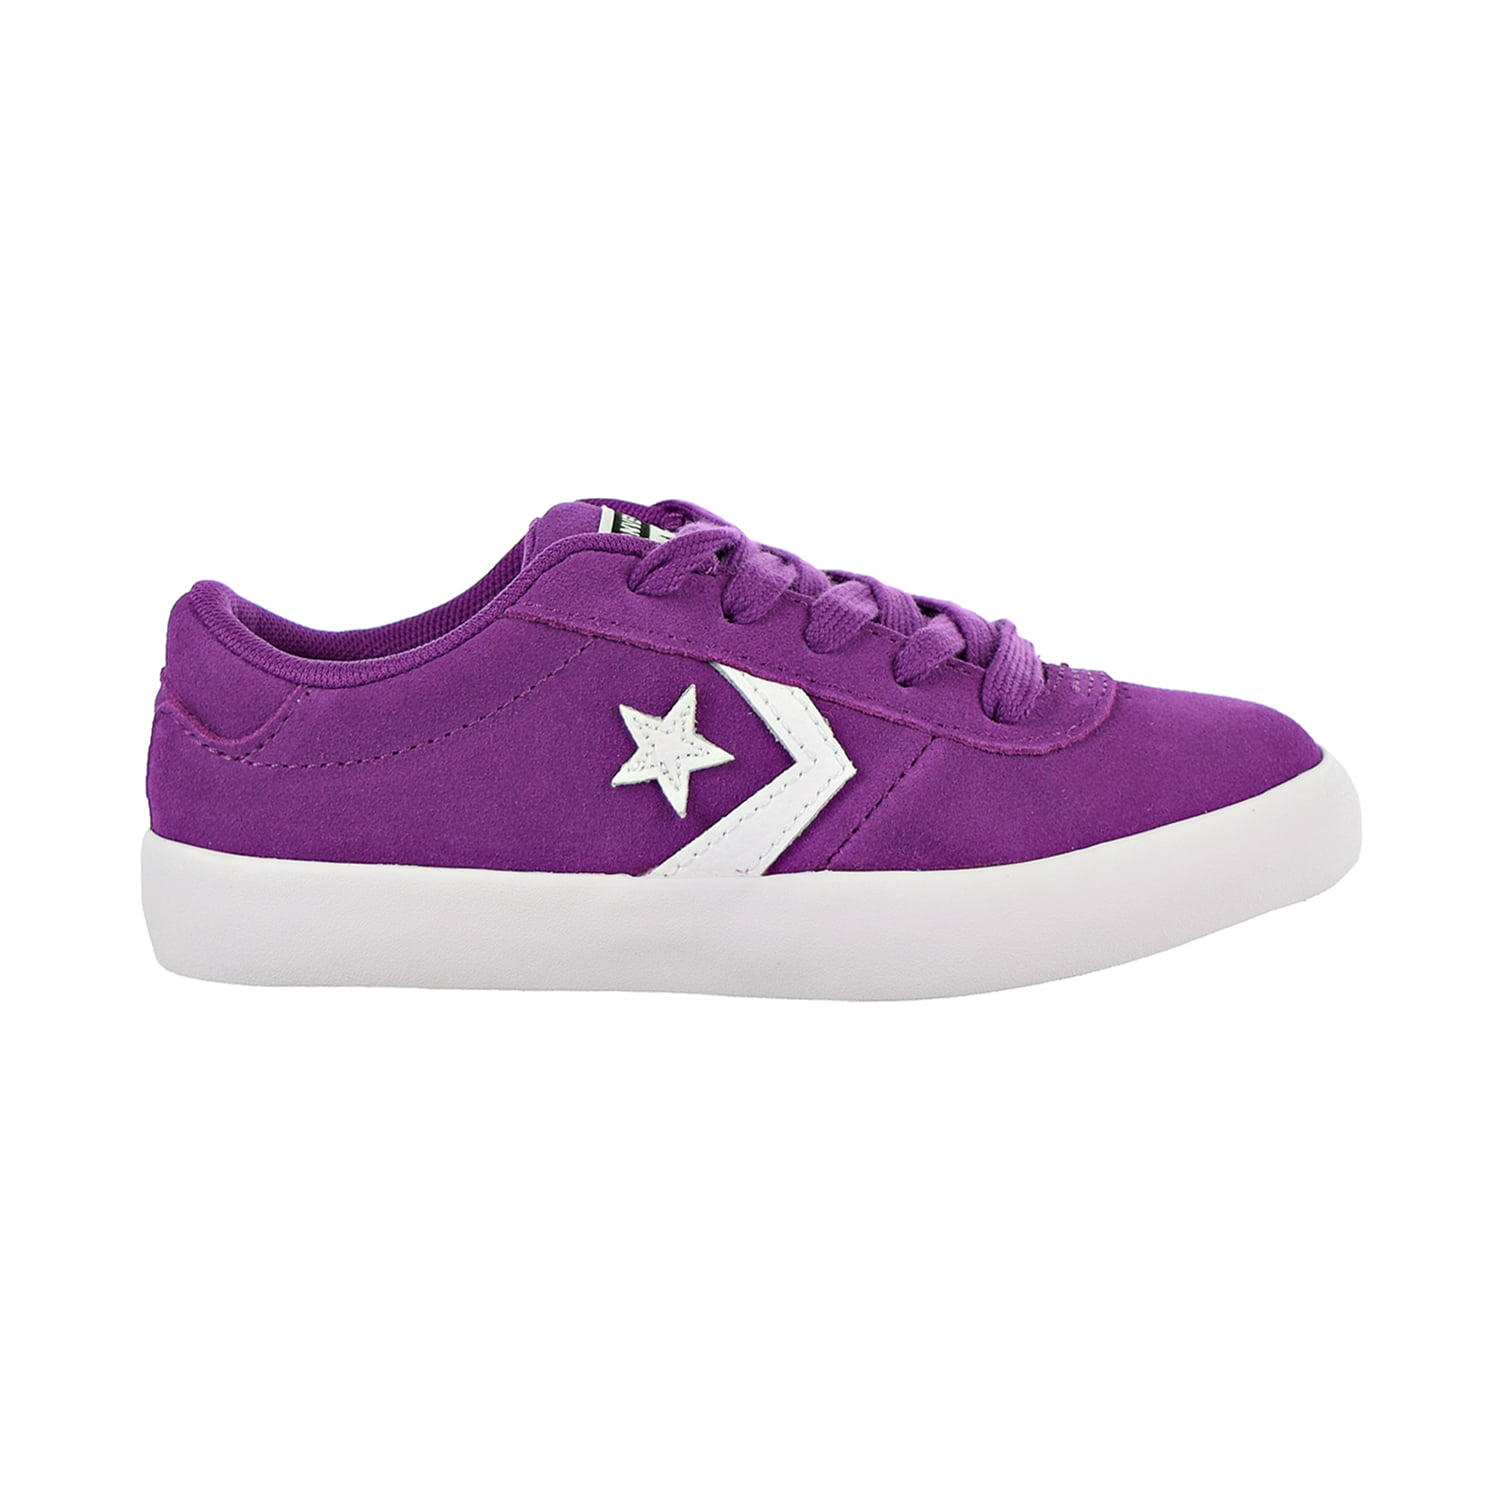 converse point star ox shoes